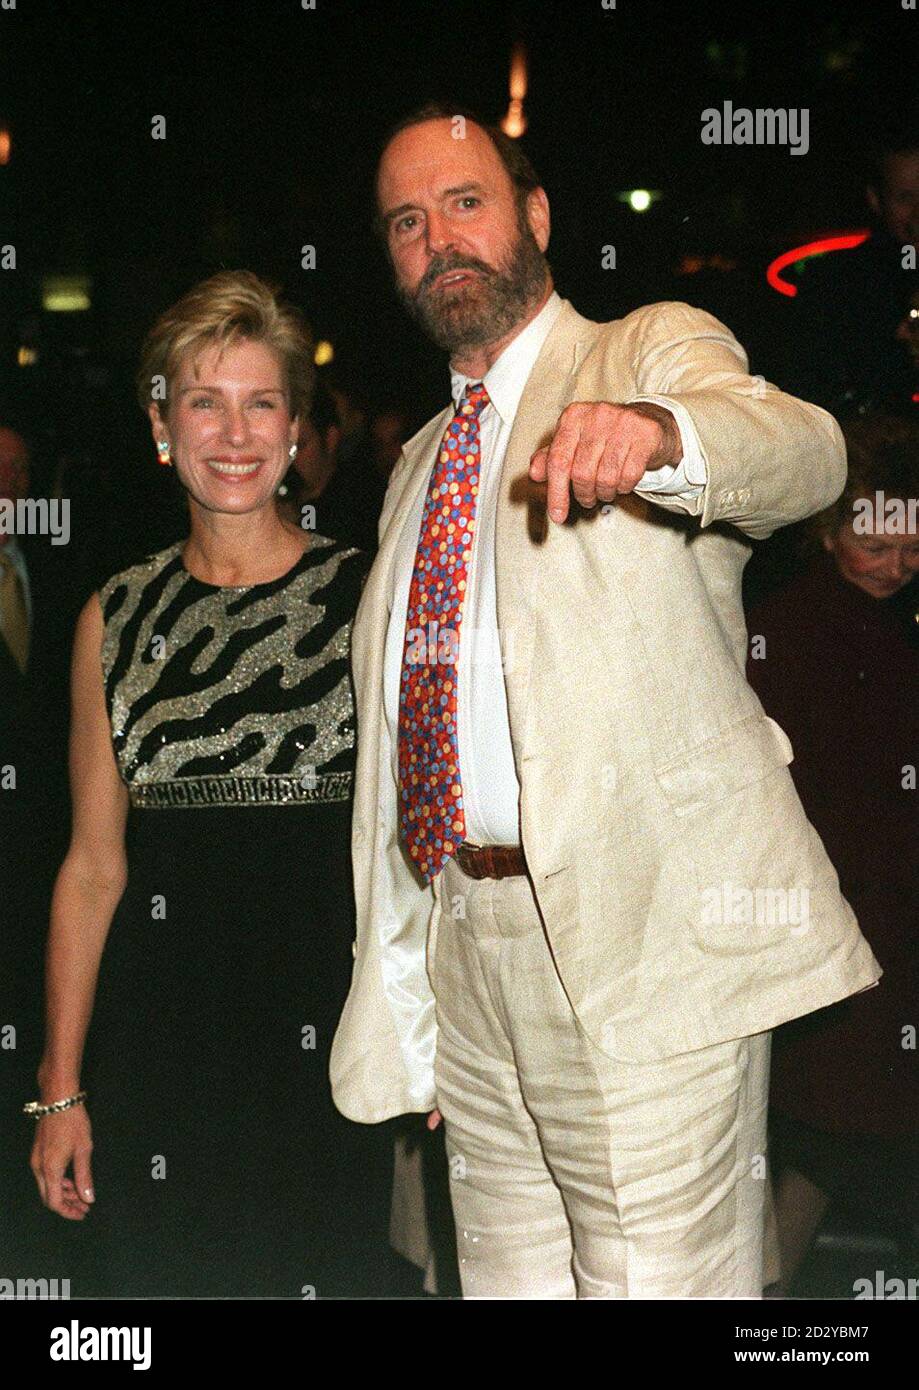 PA NEWS PHOTO 28/01/97 JOHN CLEESE ACCOMPANIED BY HIS WIFE ALYCE FAYE EICHELBERGER ARRIVING AT THE EMPIRE, LEICESTER SQUARE, LONDON FOR THE EUROPEAN GALA CHARITY PREMIERE OF  "FIERCE CREATURES" Stock Photo